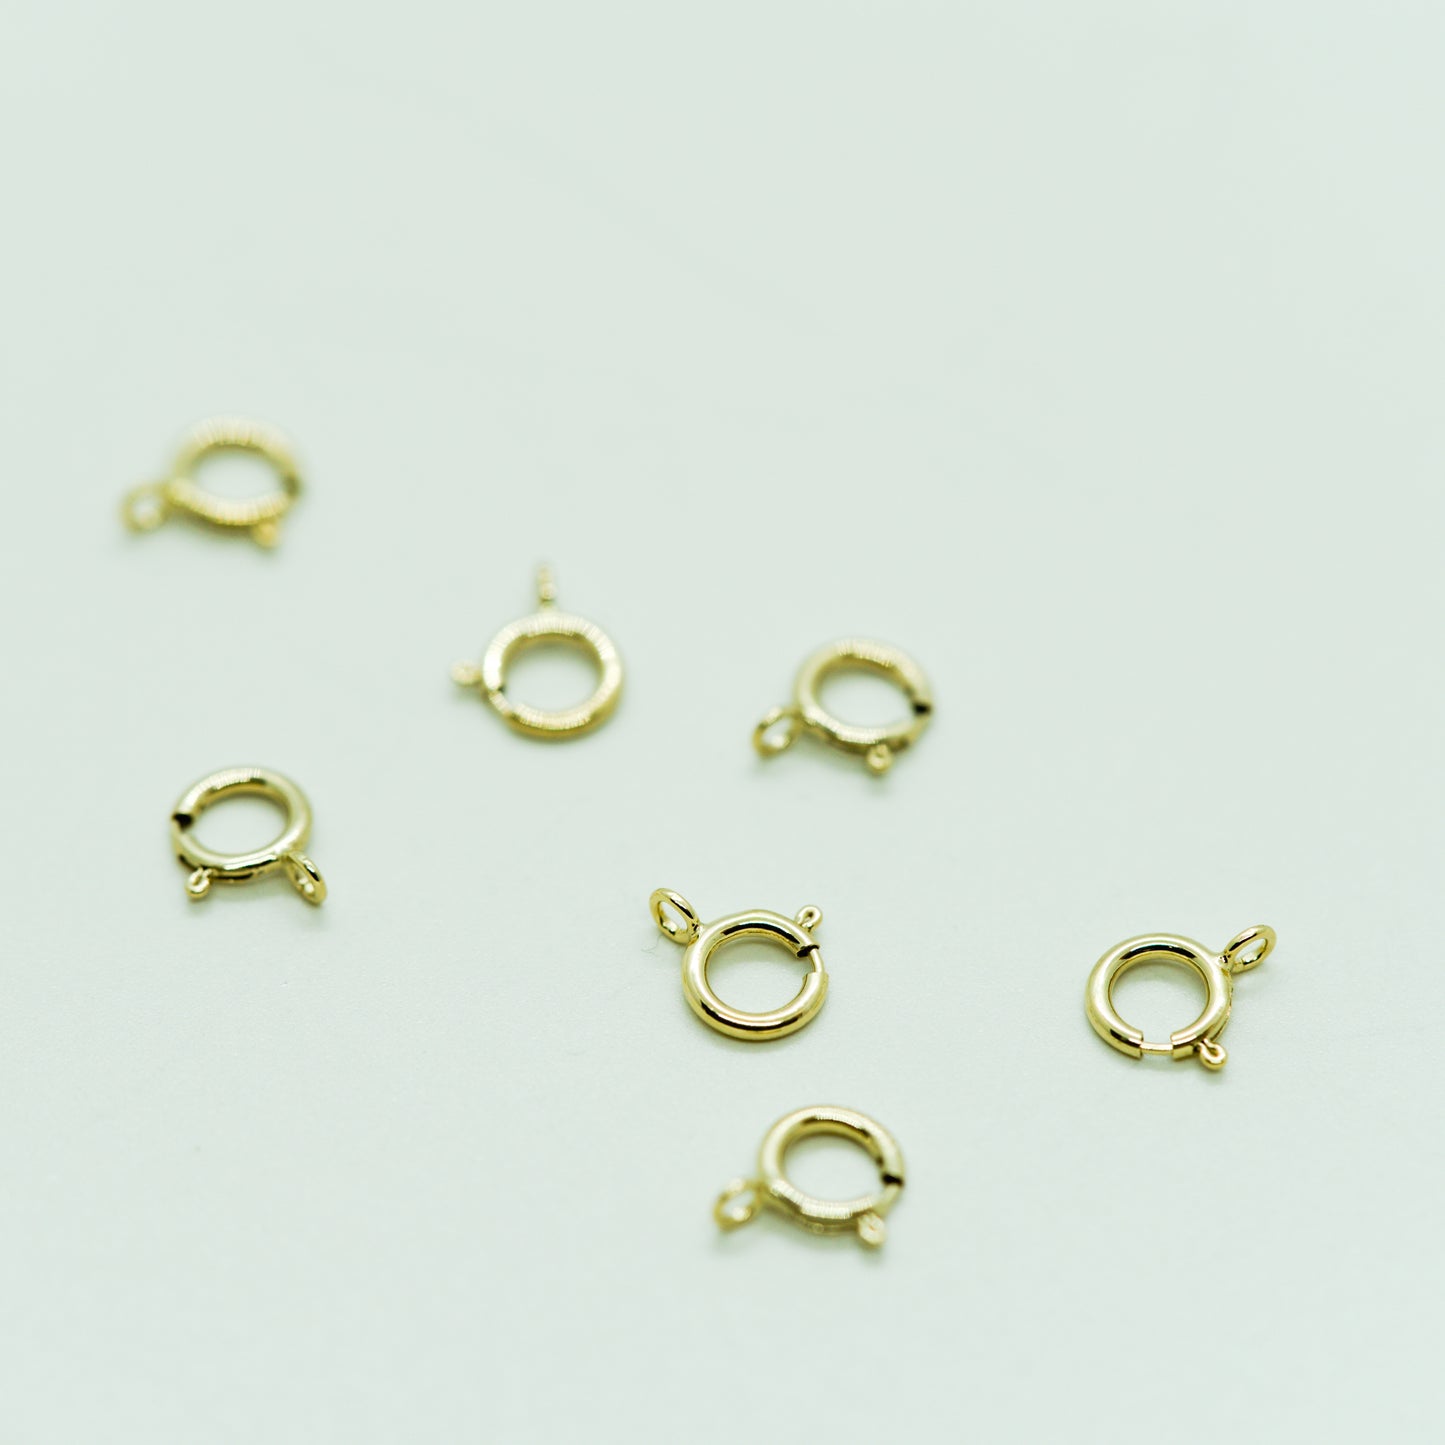 10 pcs Gold Filled Spring Ring Clasp w/Open Ring 6mm